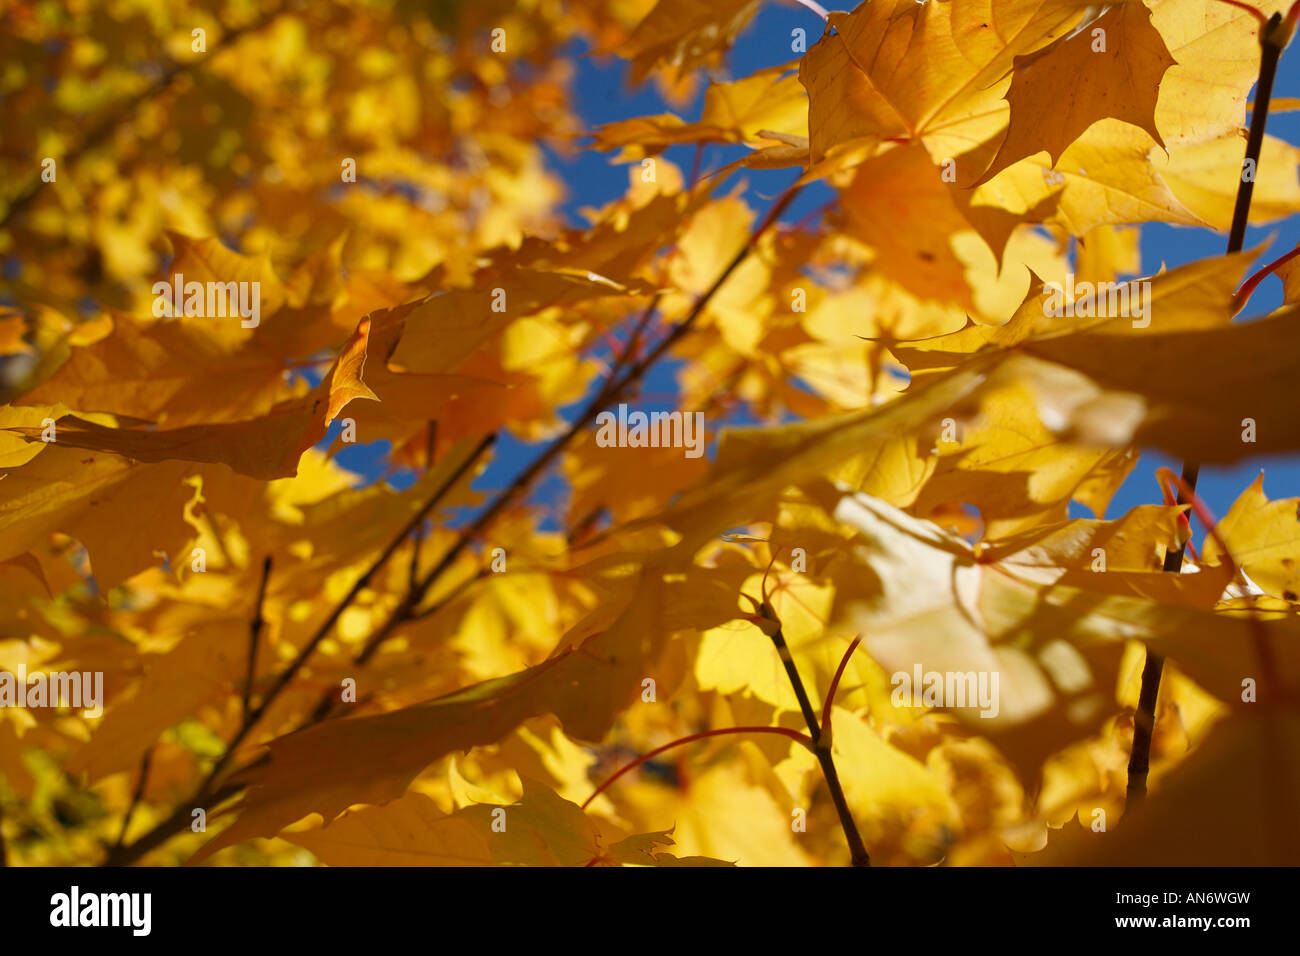 Golden Leaves against a blue sky. Stock Photo